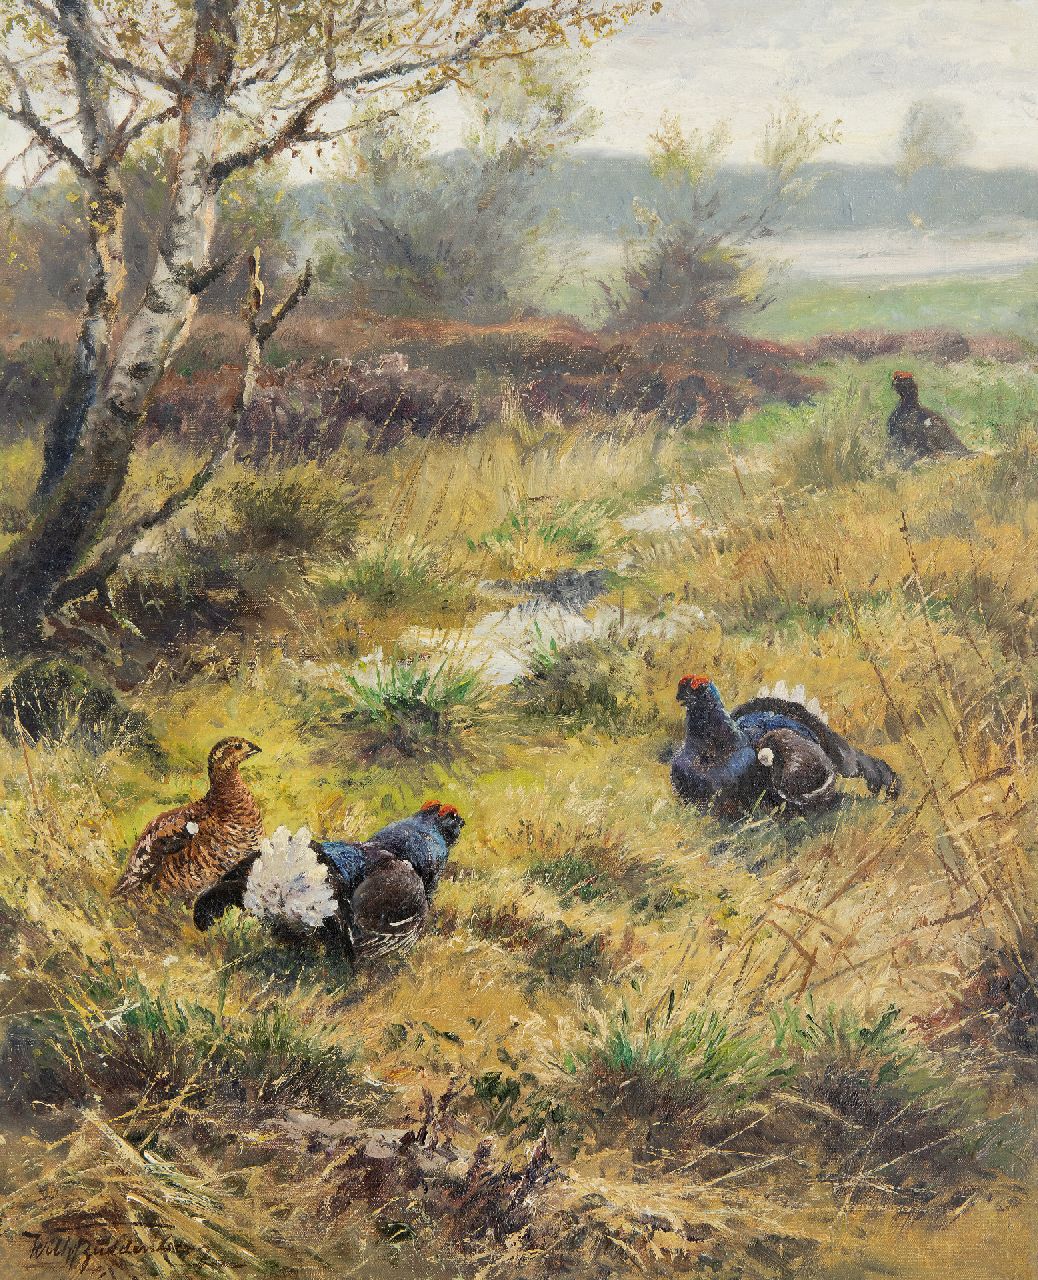 Buddenberg W.H.F.  | 'Wilhelm' Hermann Friedrich Buddenberg | Paintings offered for sale | Black grouses on the heath, oil on canvas 50.1 x 40.0 cm, signed l.l.